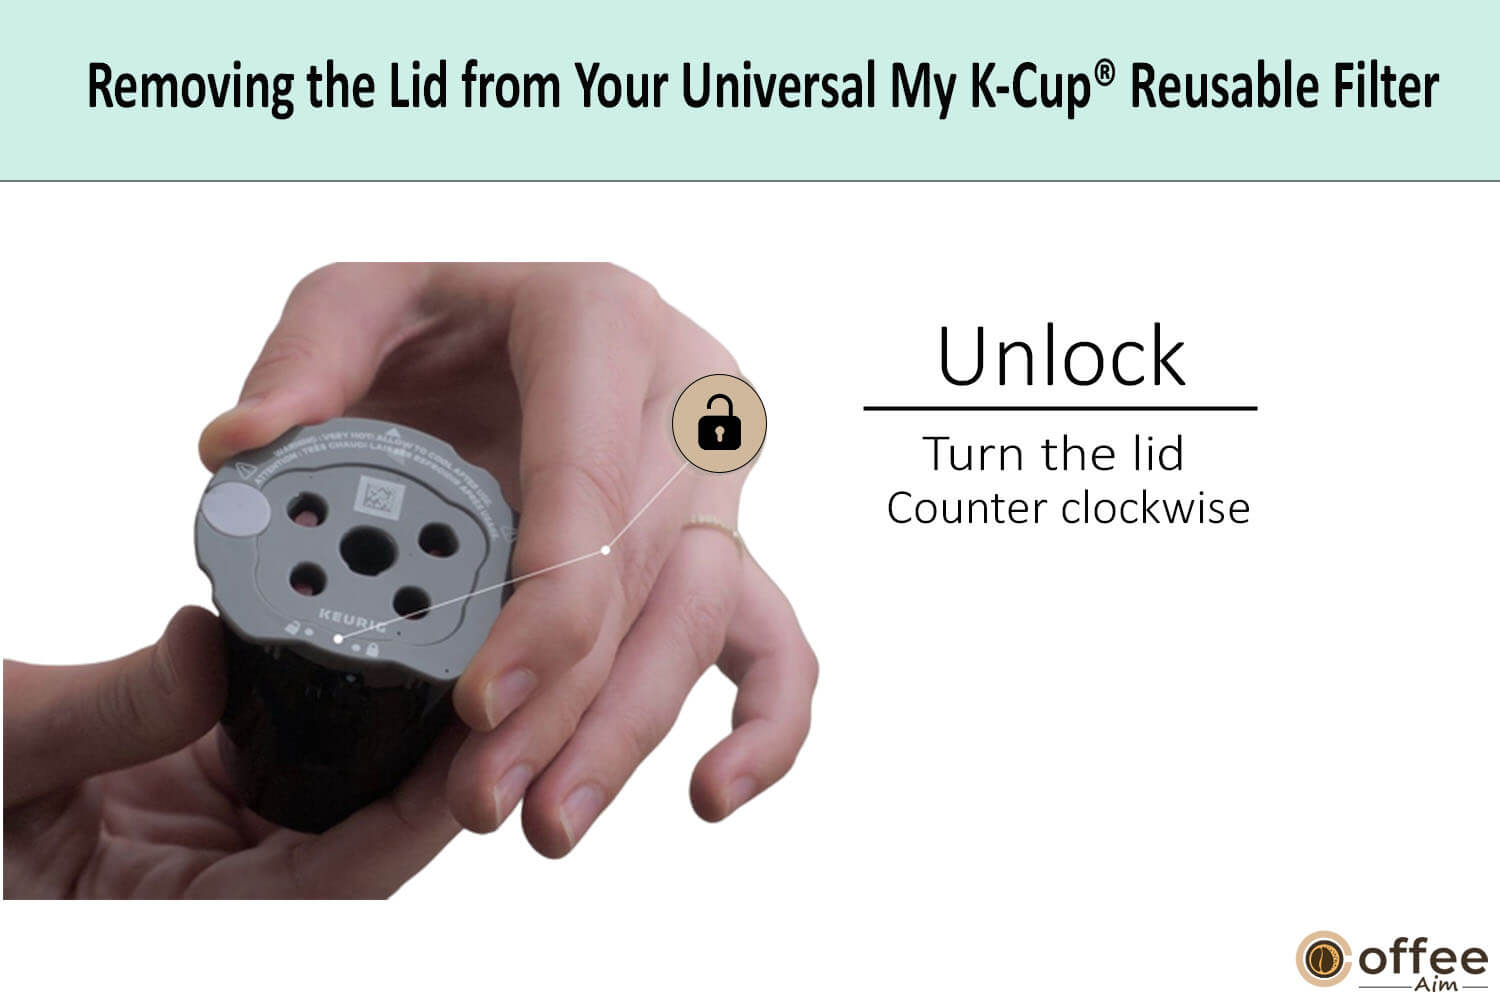 In this image, I elucidate the how to remove the lid from universal my k cup  reusable filter.